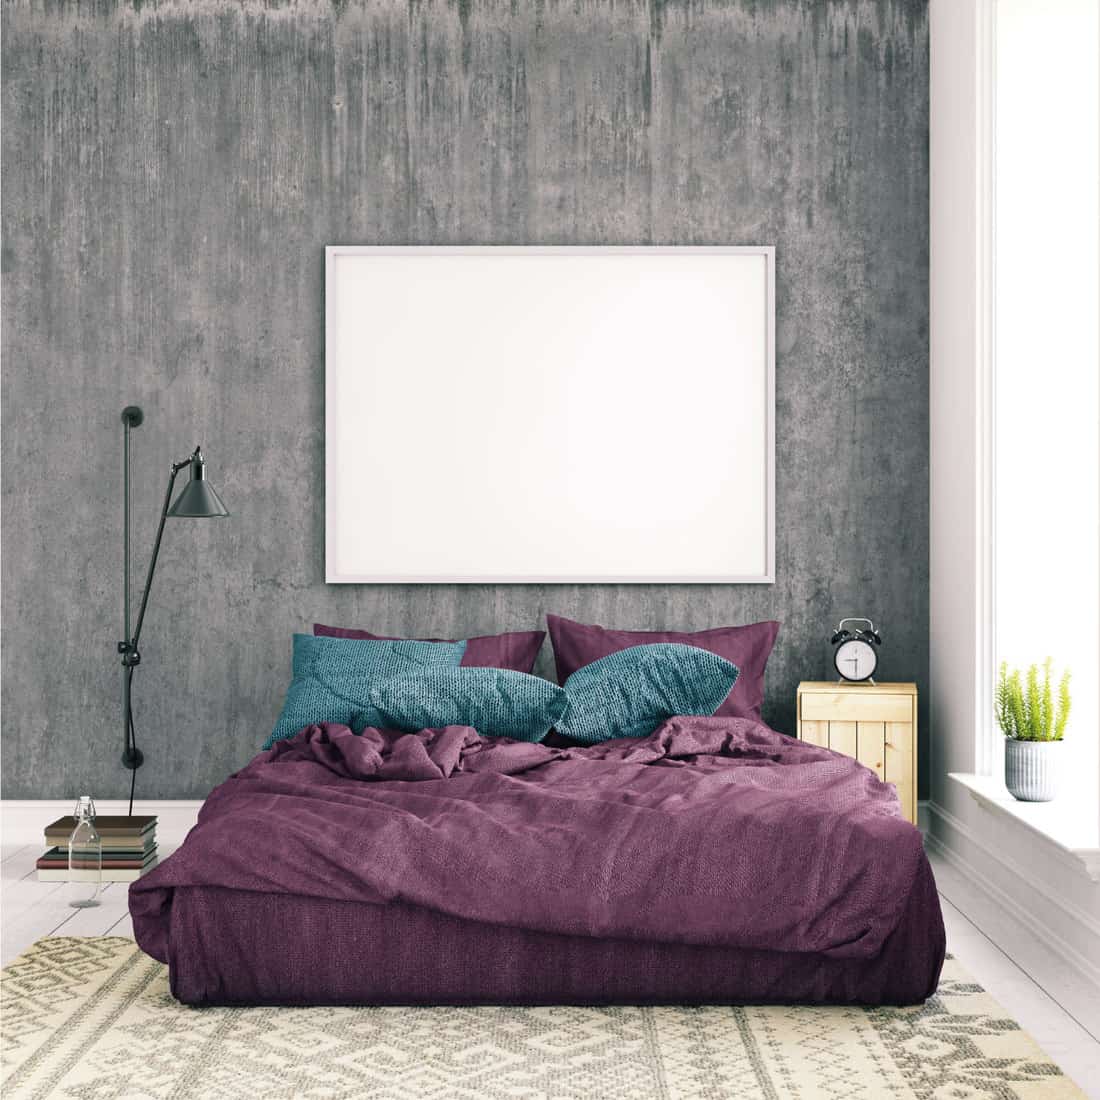 Basic bedroom interior with pastel colored bed with pillow, gray concrete wall, floor lamp, carpet and a plant